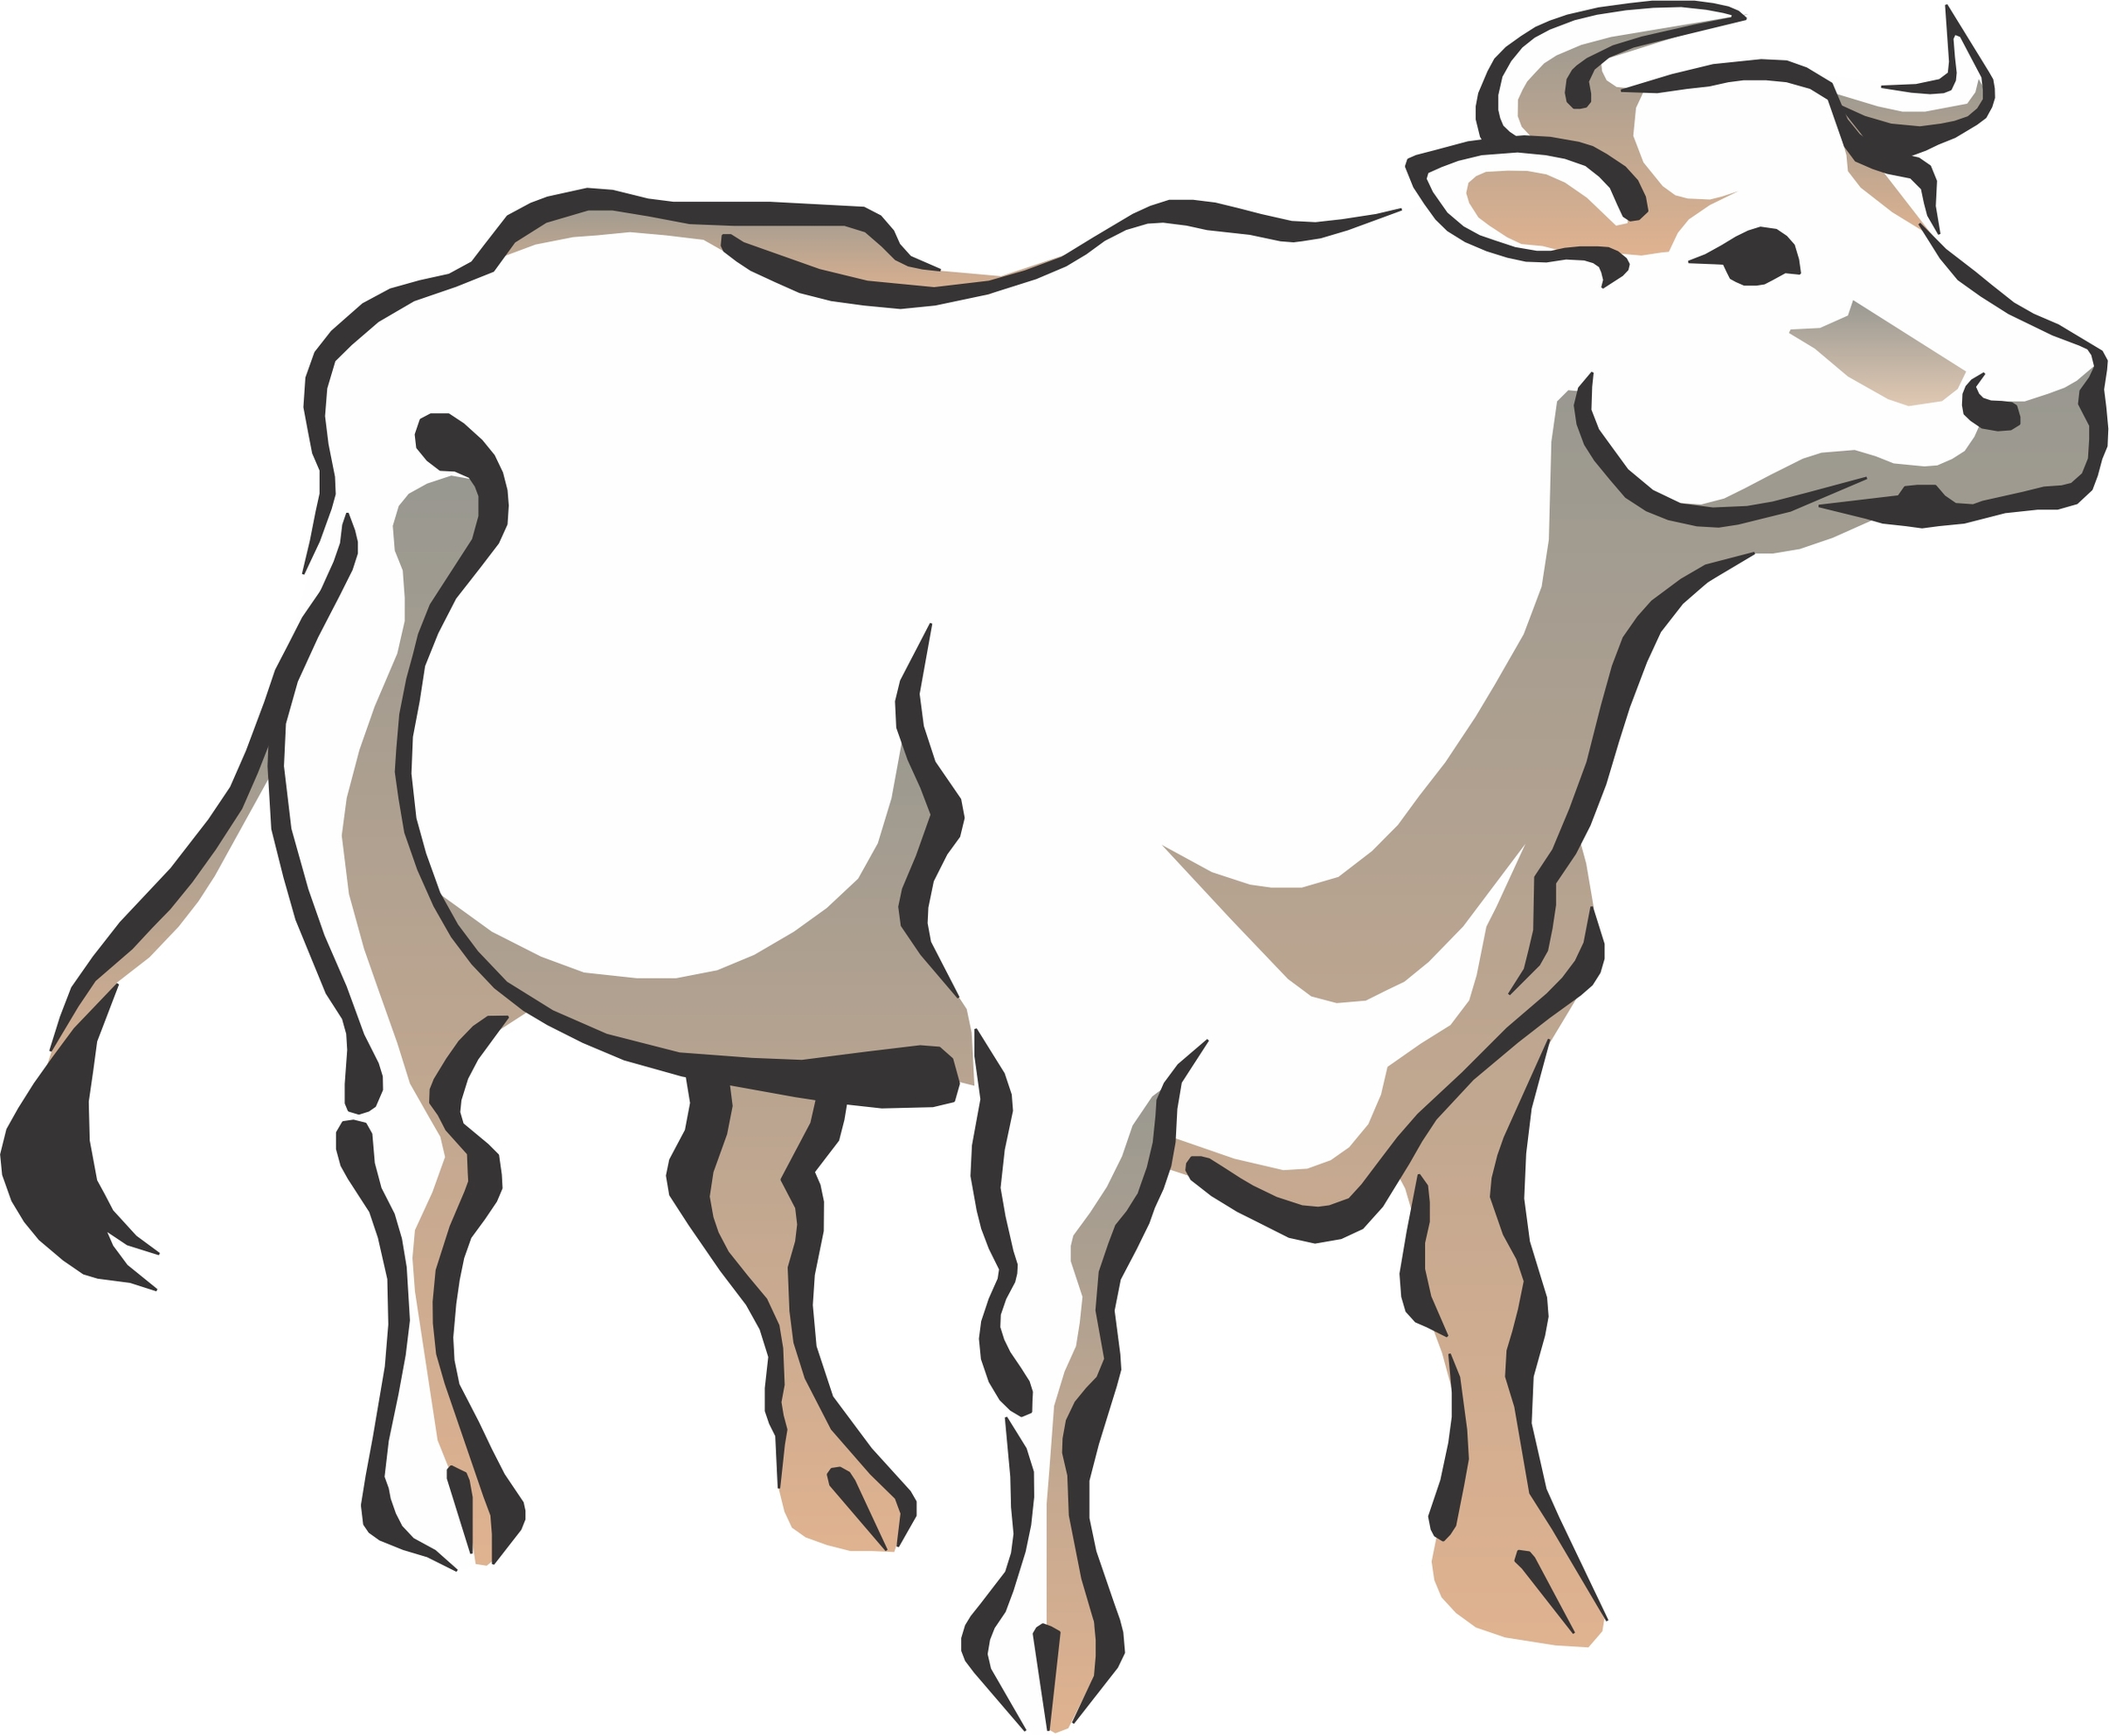 Cartoon Cow Image Clipart - Free to use Clip Art Resource